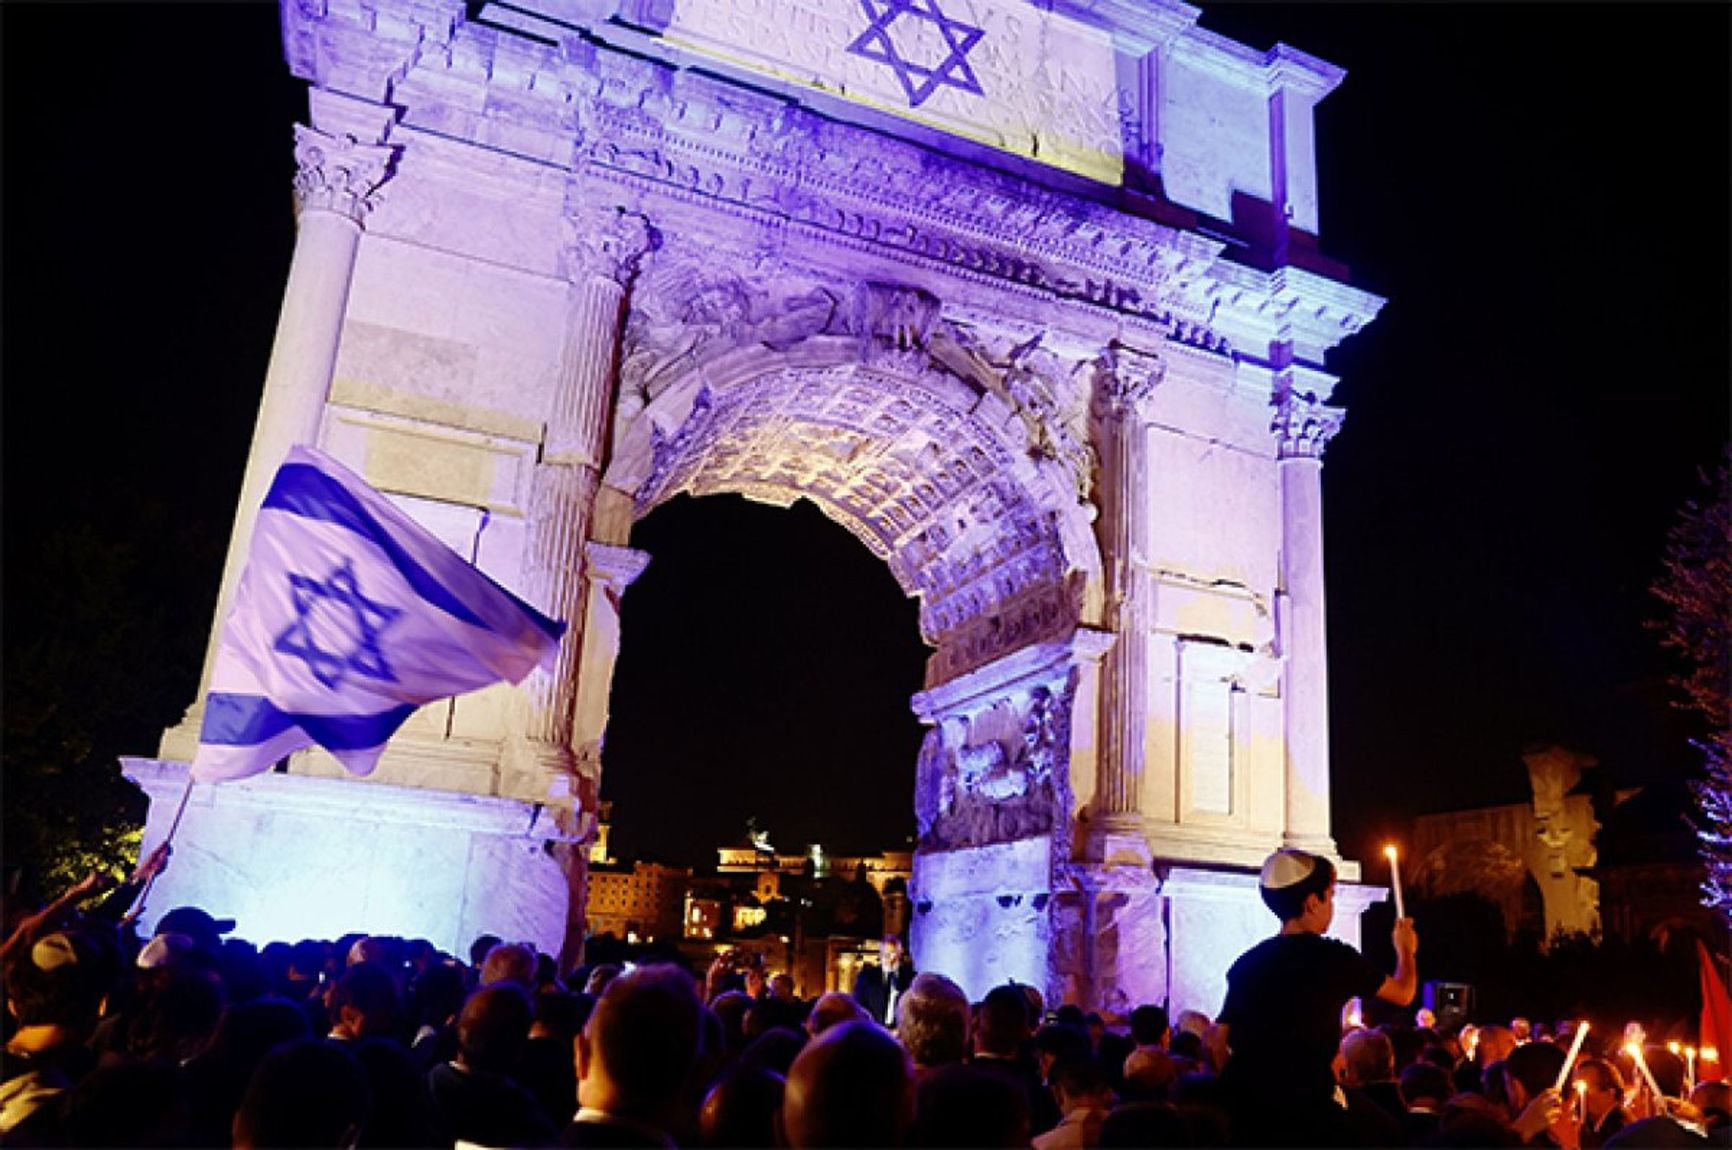 The Arch of Titus in Rome adorned with the colors of the Israeli flag